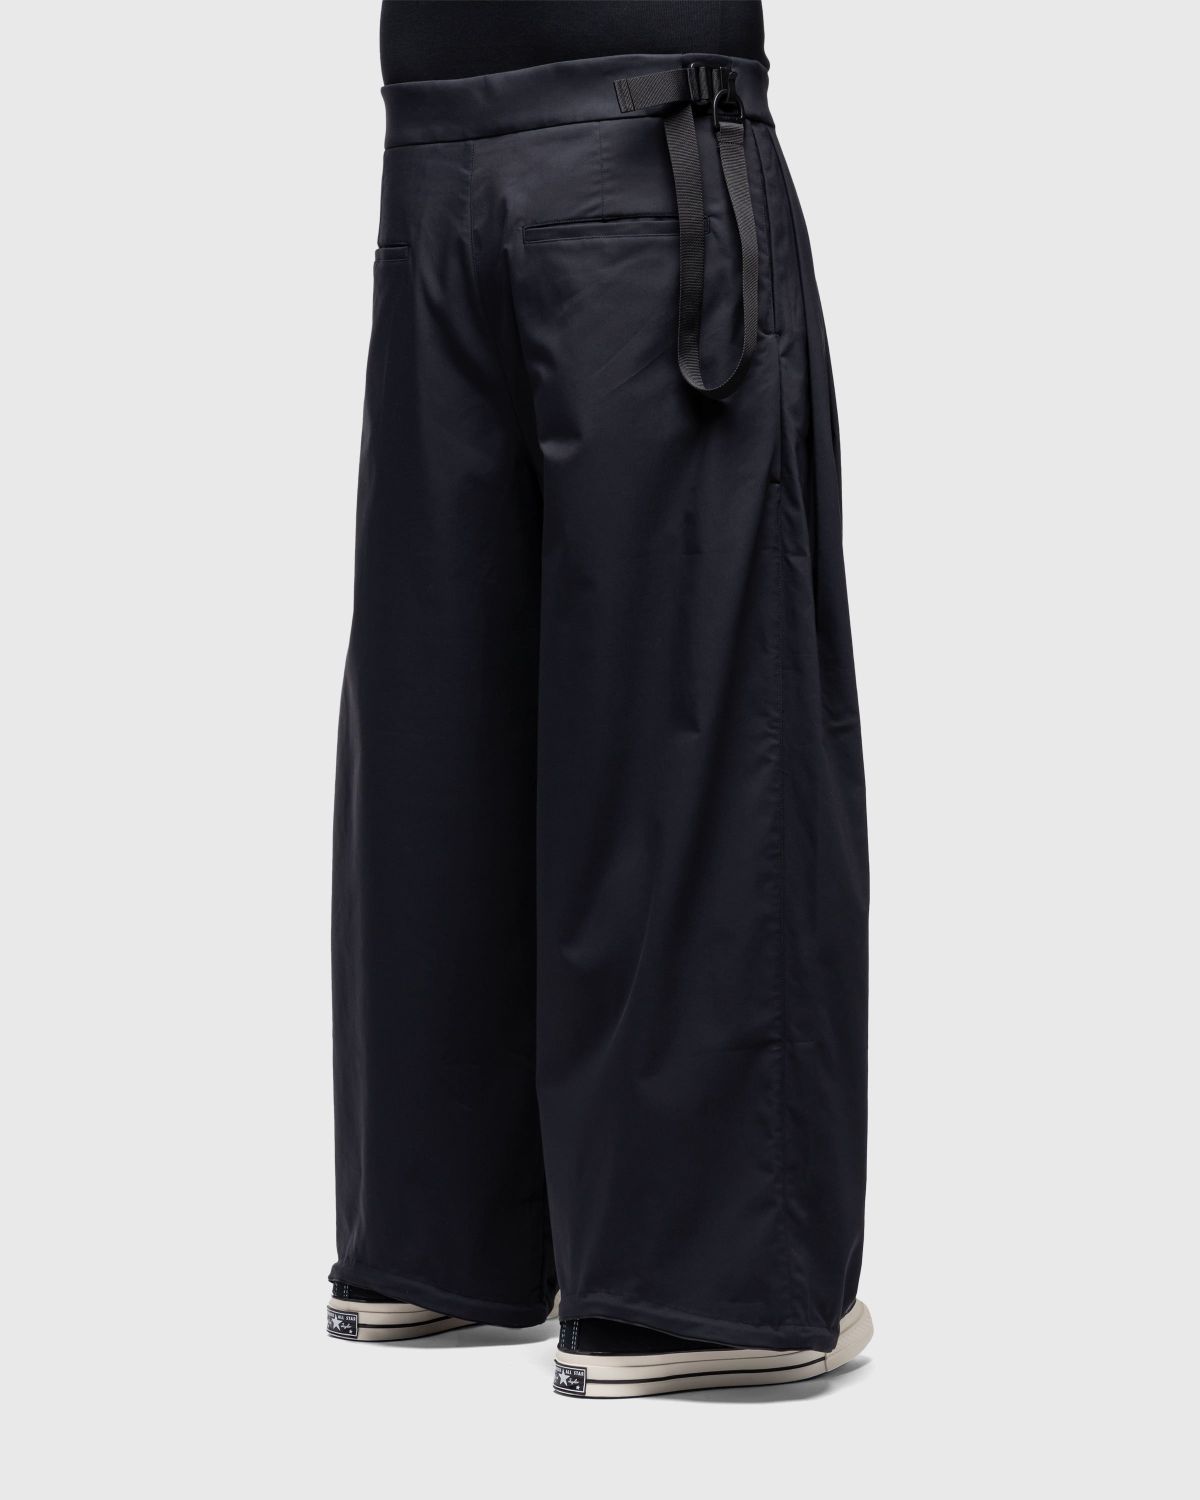 ACRONYM – P48-CH Micro Twill Pleated Trouser Black - Trousers - Black - Image 3